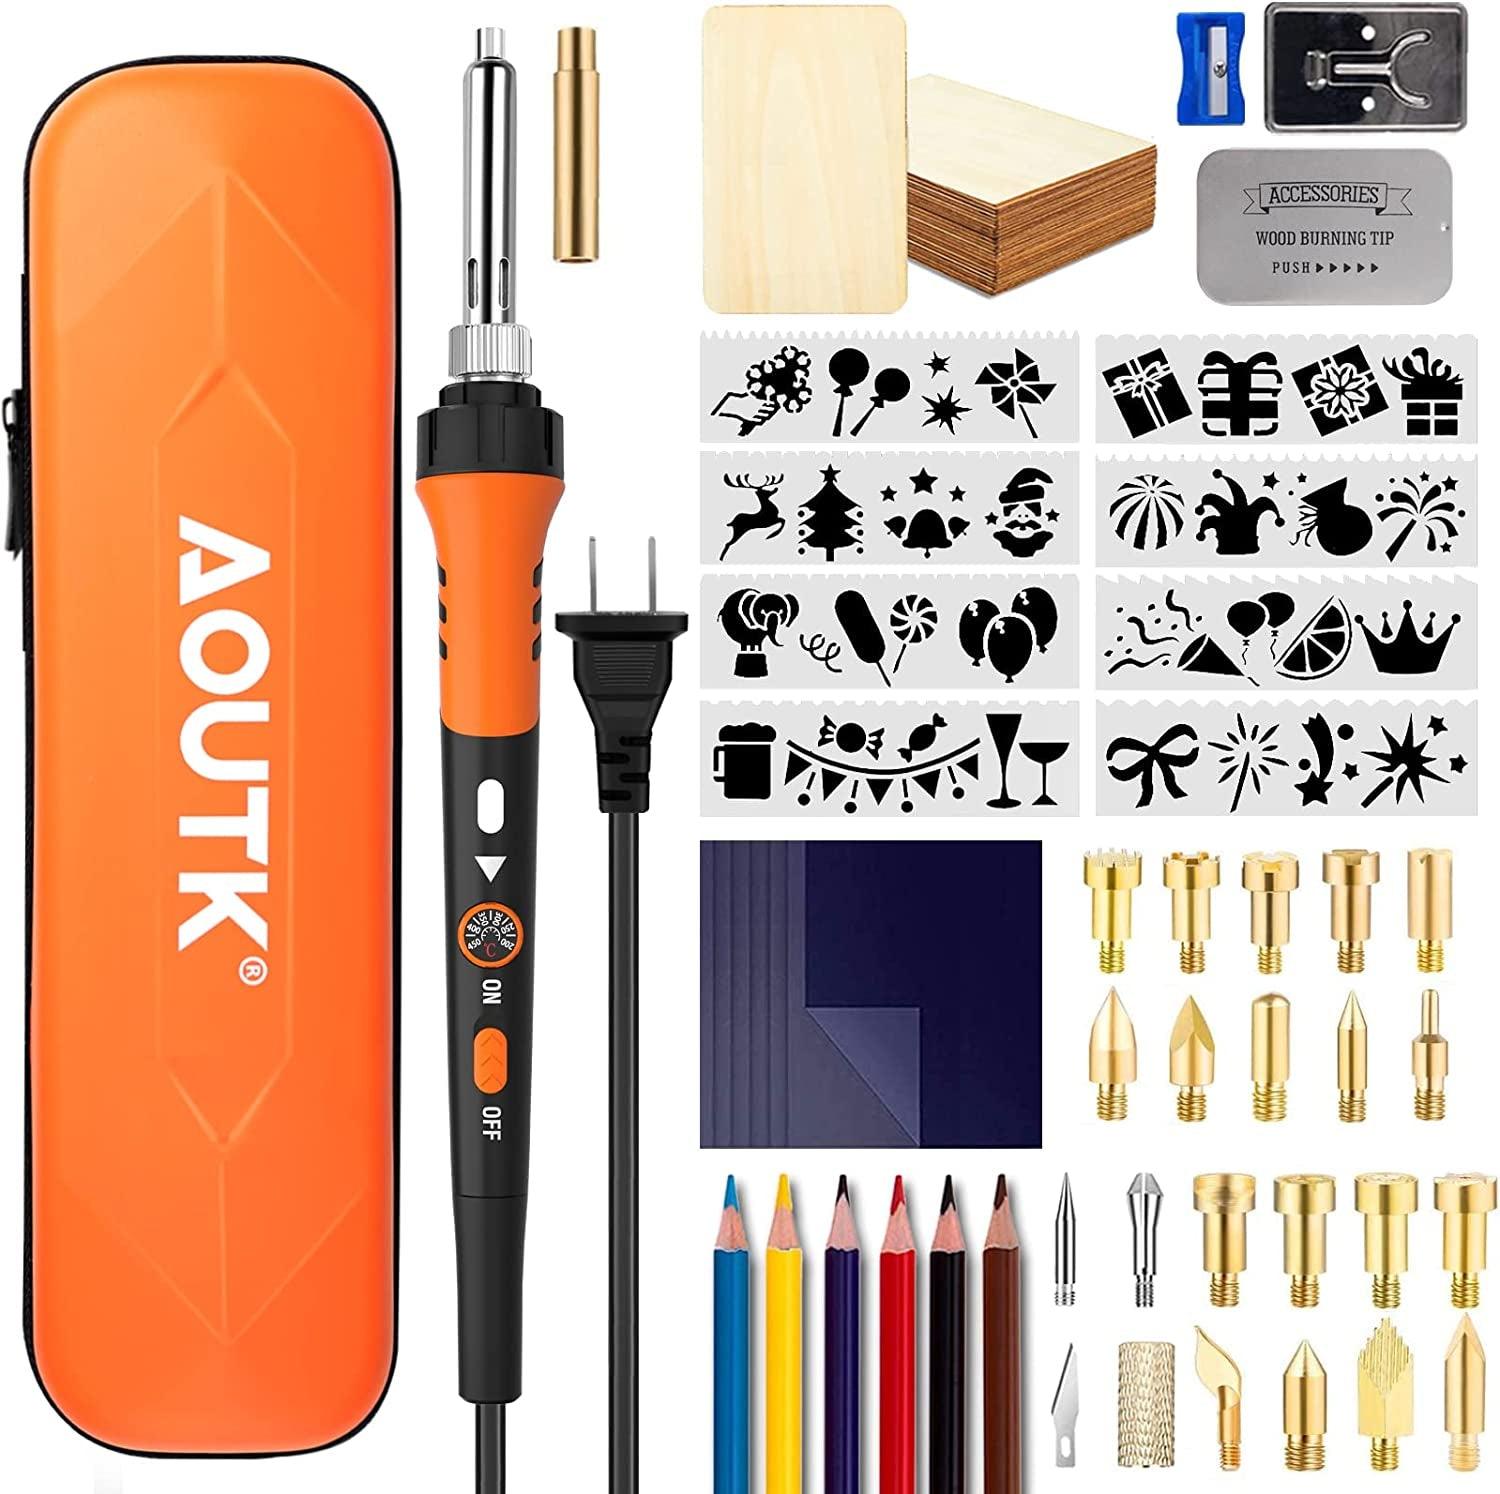 137pcs Wood Burning Kit, Diy Creative Tool Set Soldering Woodburning Pen  With Adjustable Temperature And Wood Piece For Embossing Carving Tips